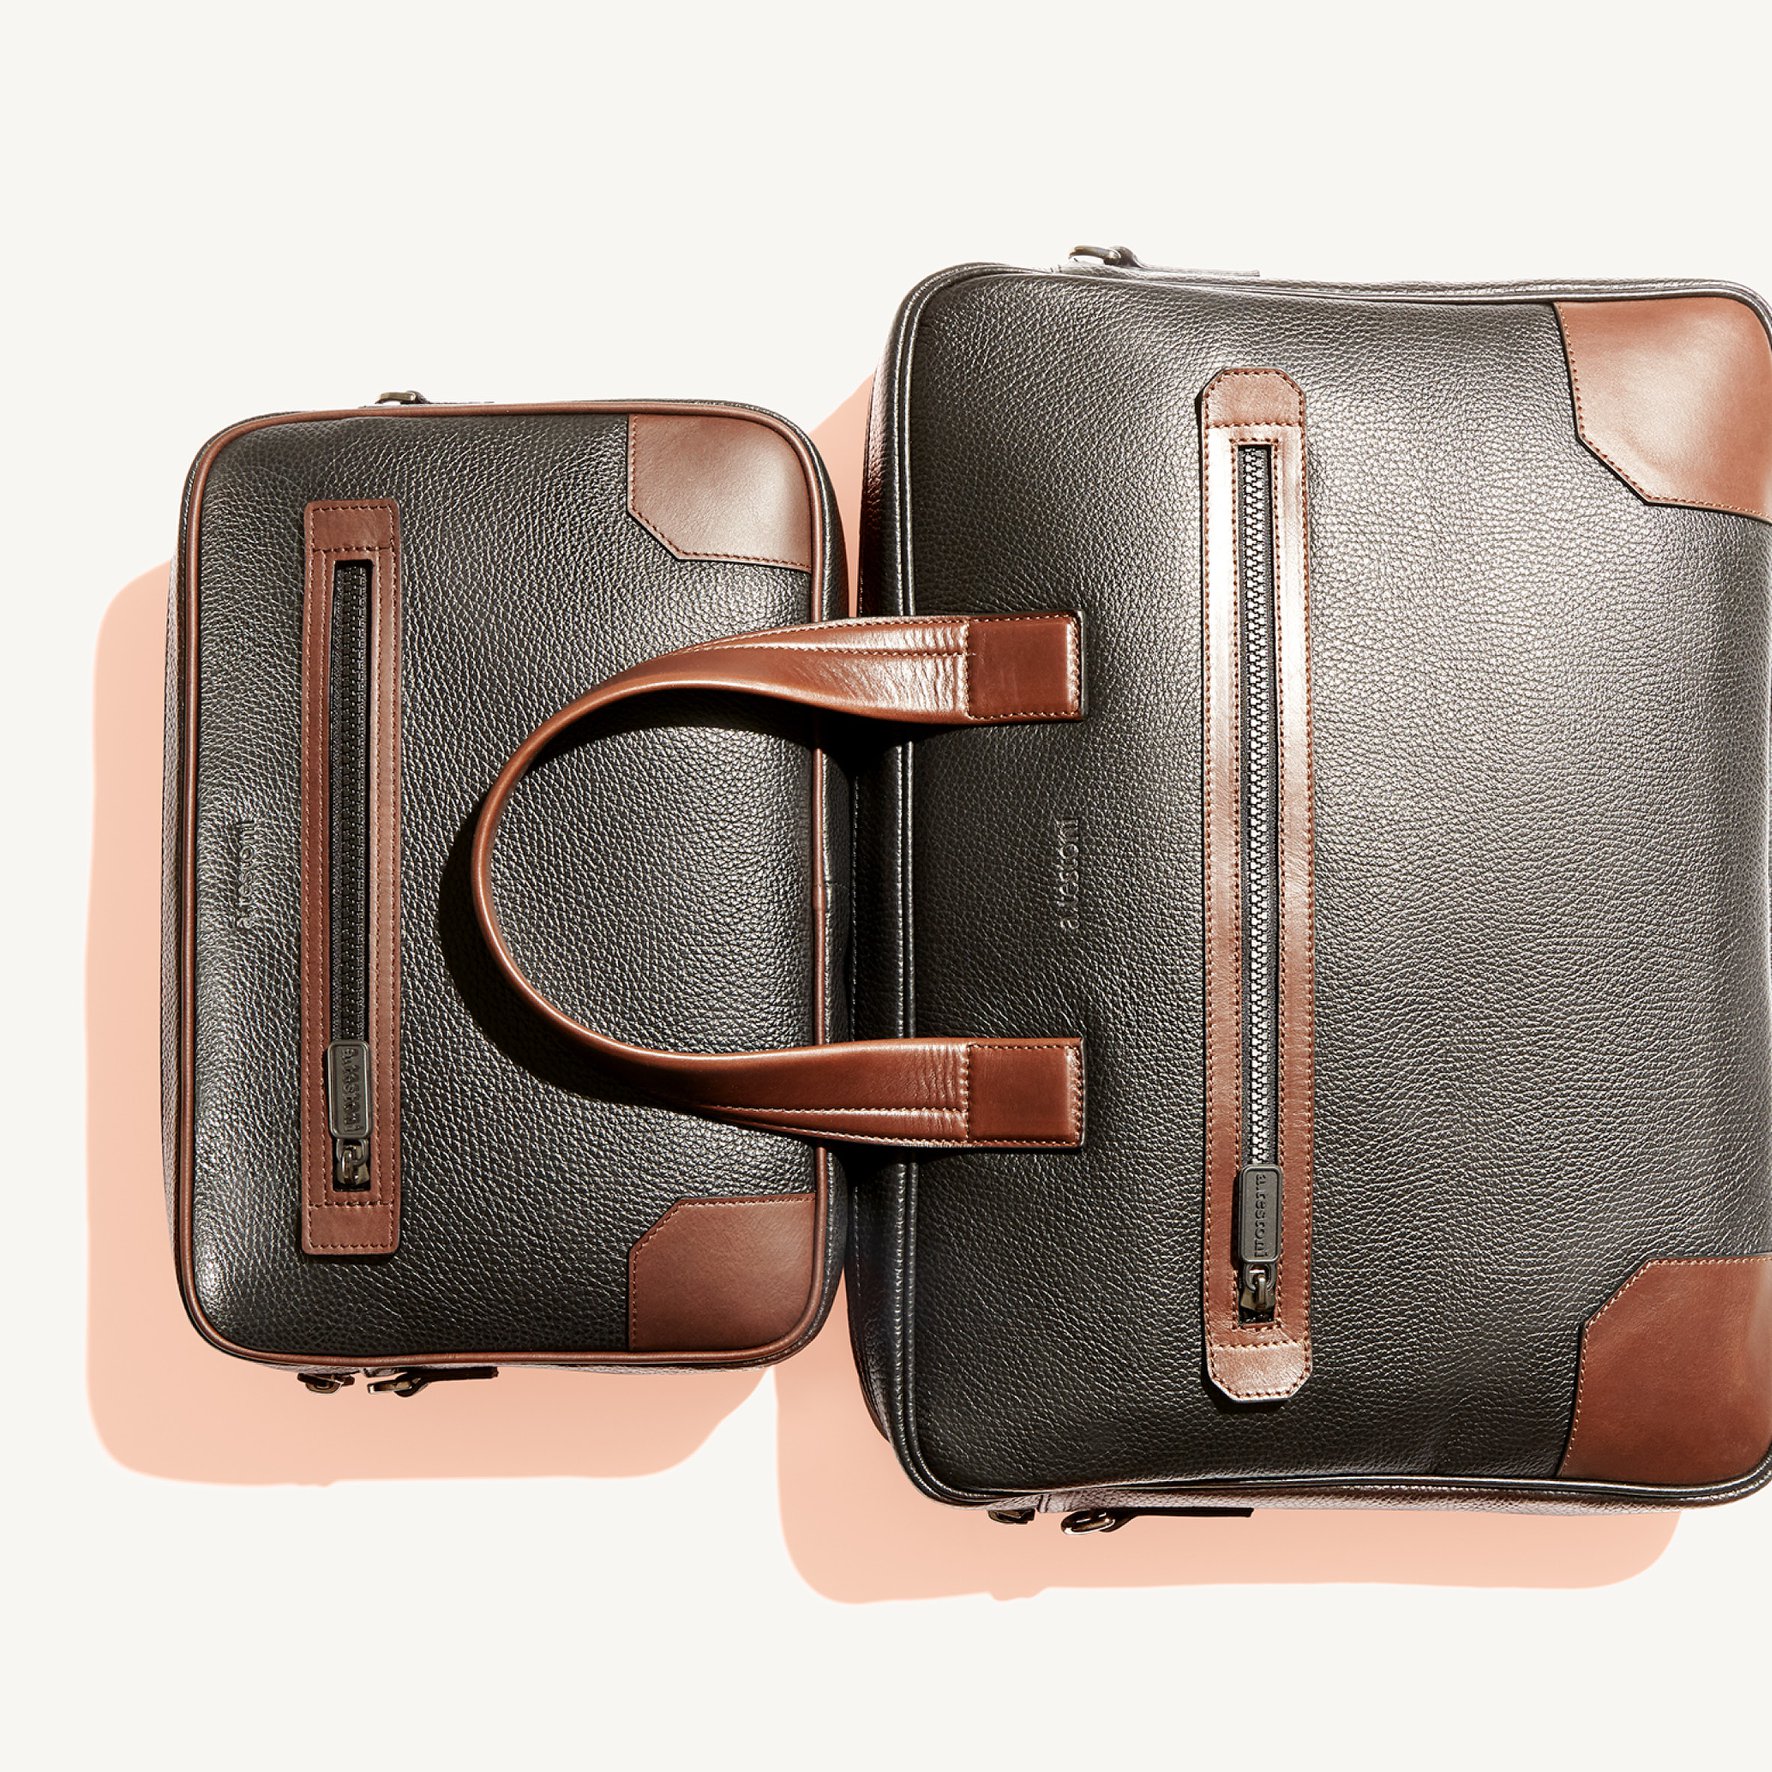 Borse Bologna: a line of everyday leather goods is born - simple, practical and absolutely essential. #atestoni #atestonihongkong #leather #ss19 #bag #madeinitaly ► Follow our Instagram: @a.testoniHongKong ...